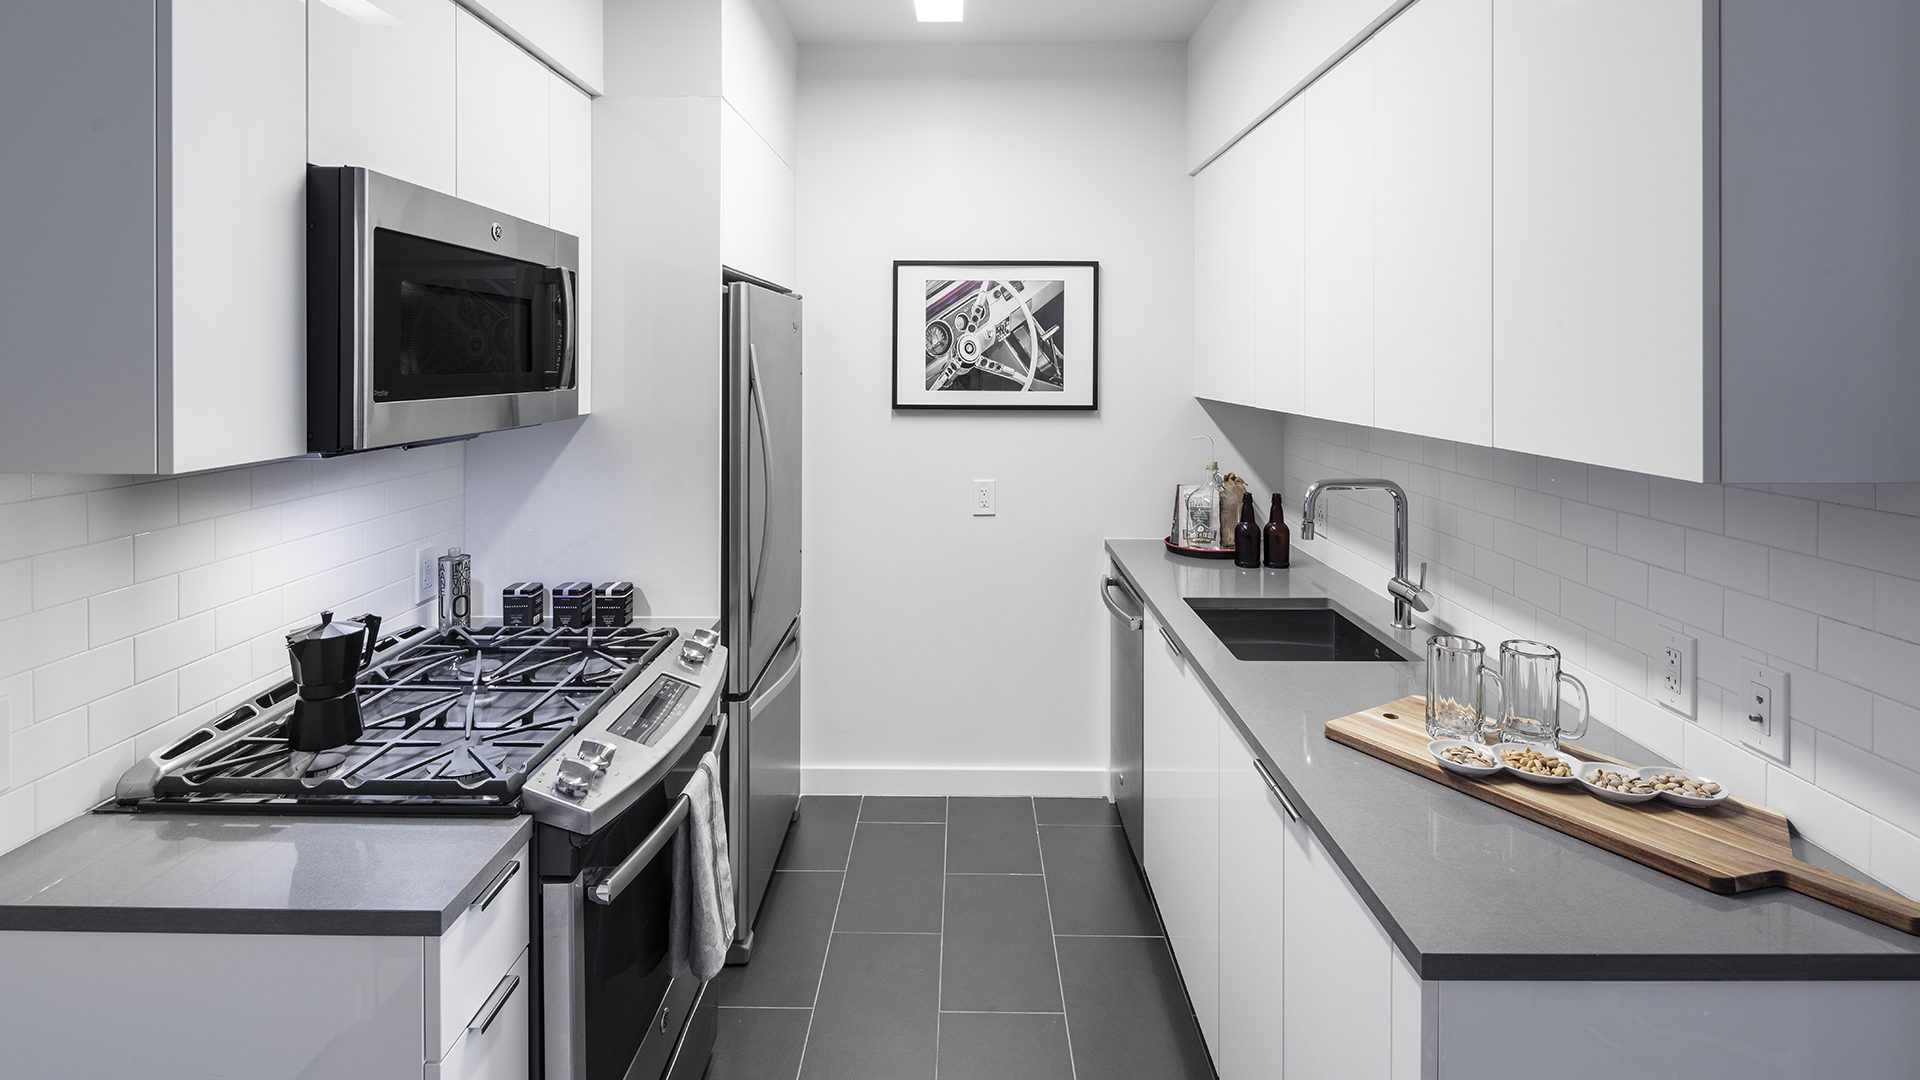 An image of a kitchen featuring brand new stainless steel appliances, grey flooring, and white countertops.